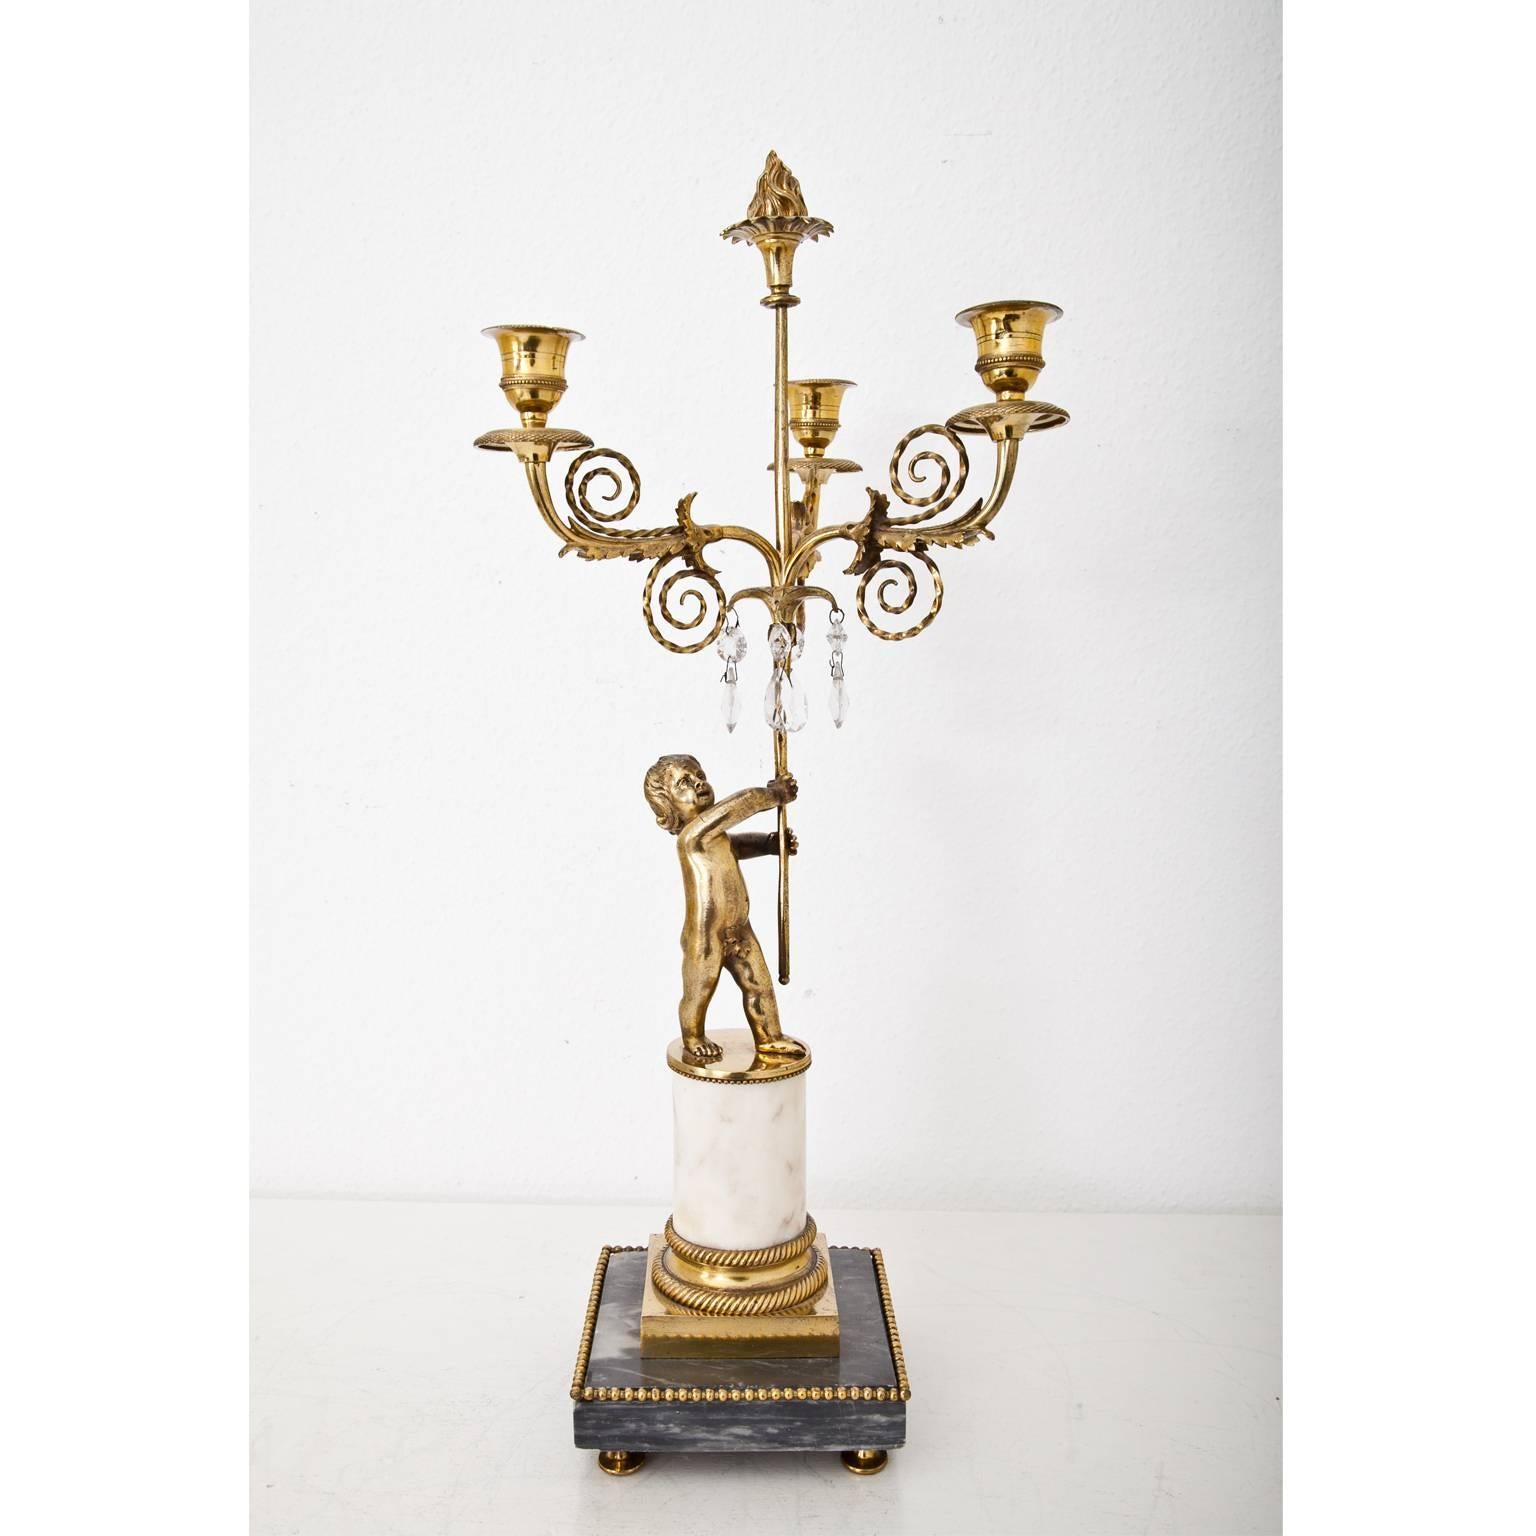 Three-armed candelabra with putto out of gilt bronze on a grey and white marble base.